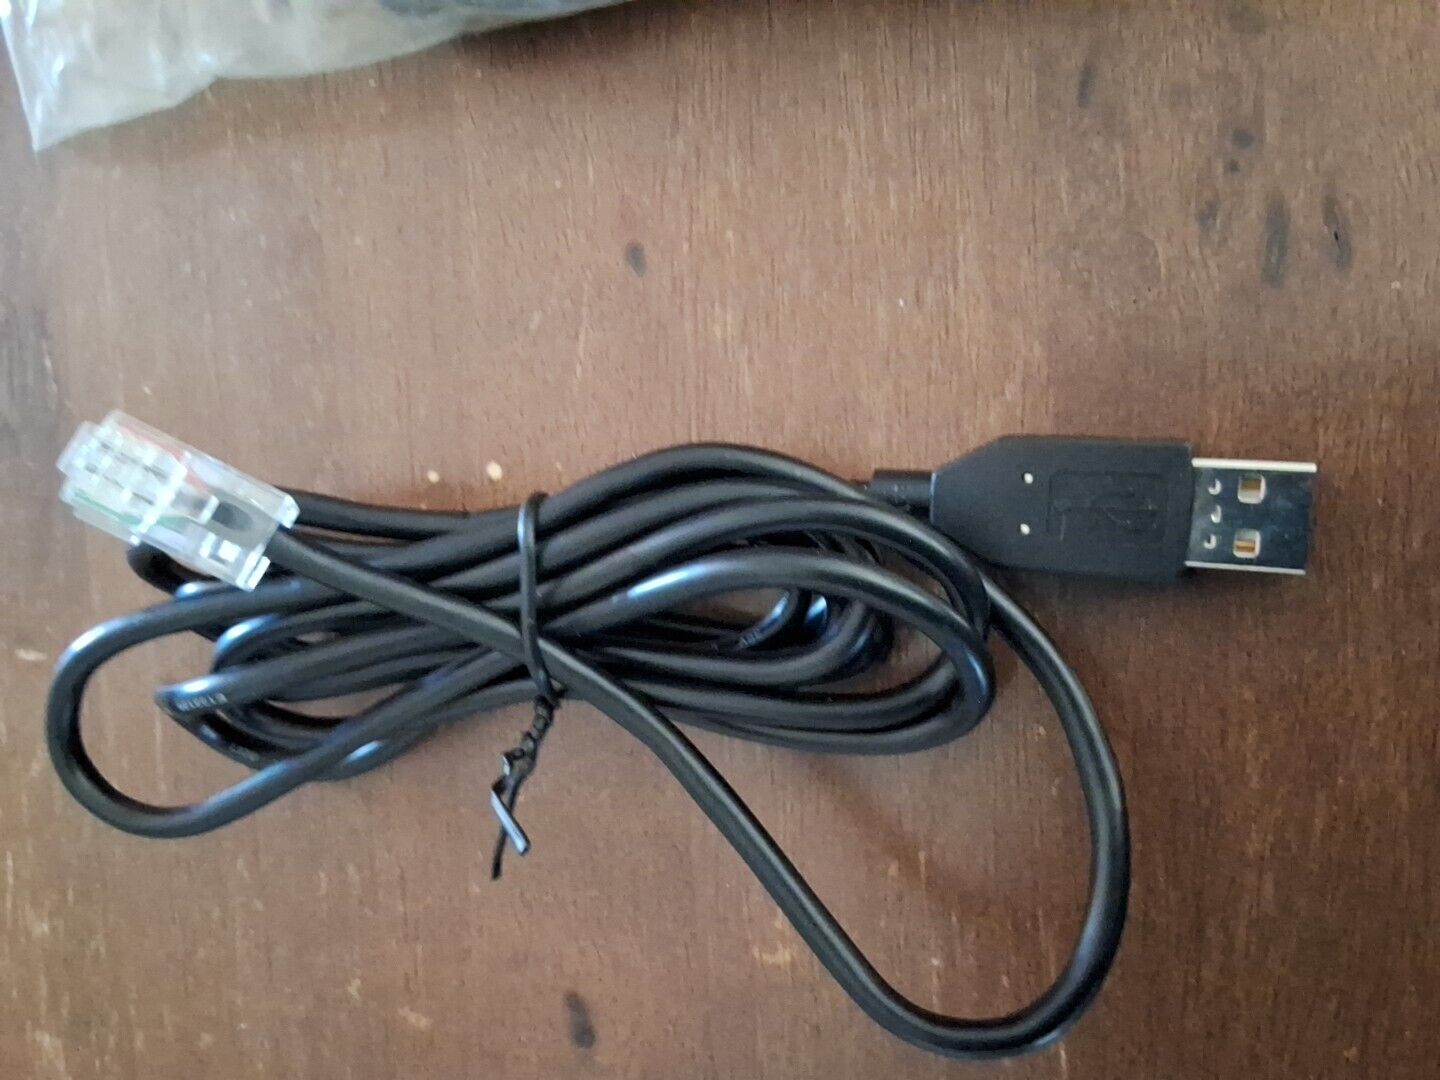 ETHERNET MALE TO USB MALE CABLE 940-0127B-001